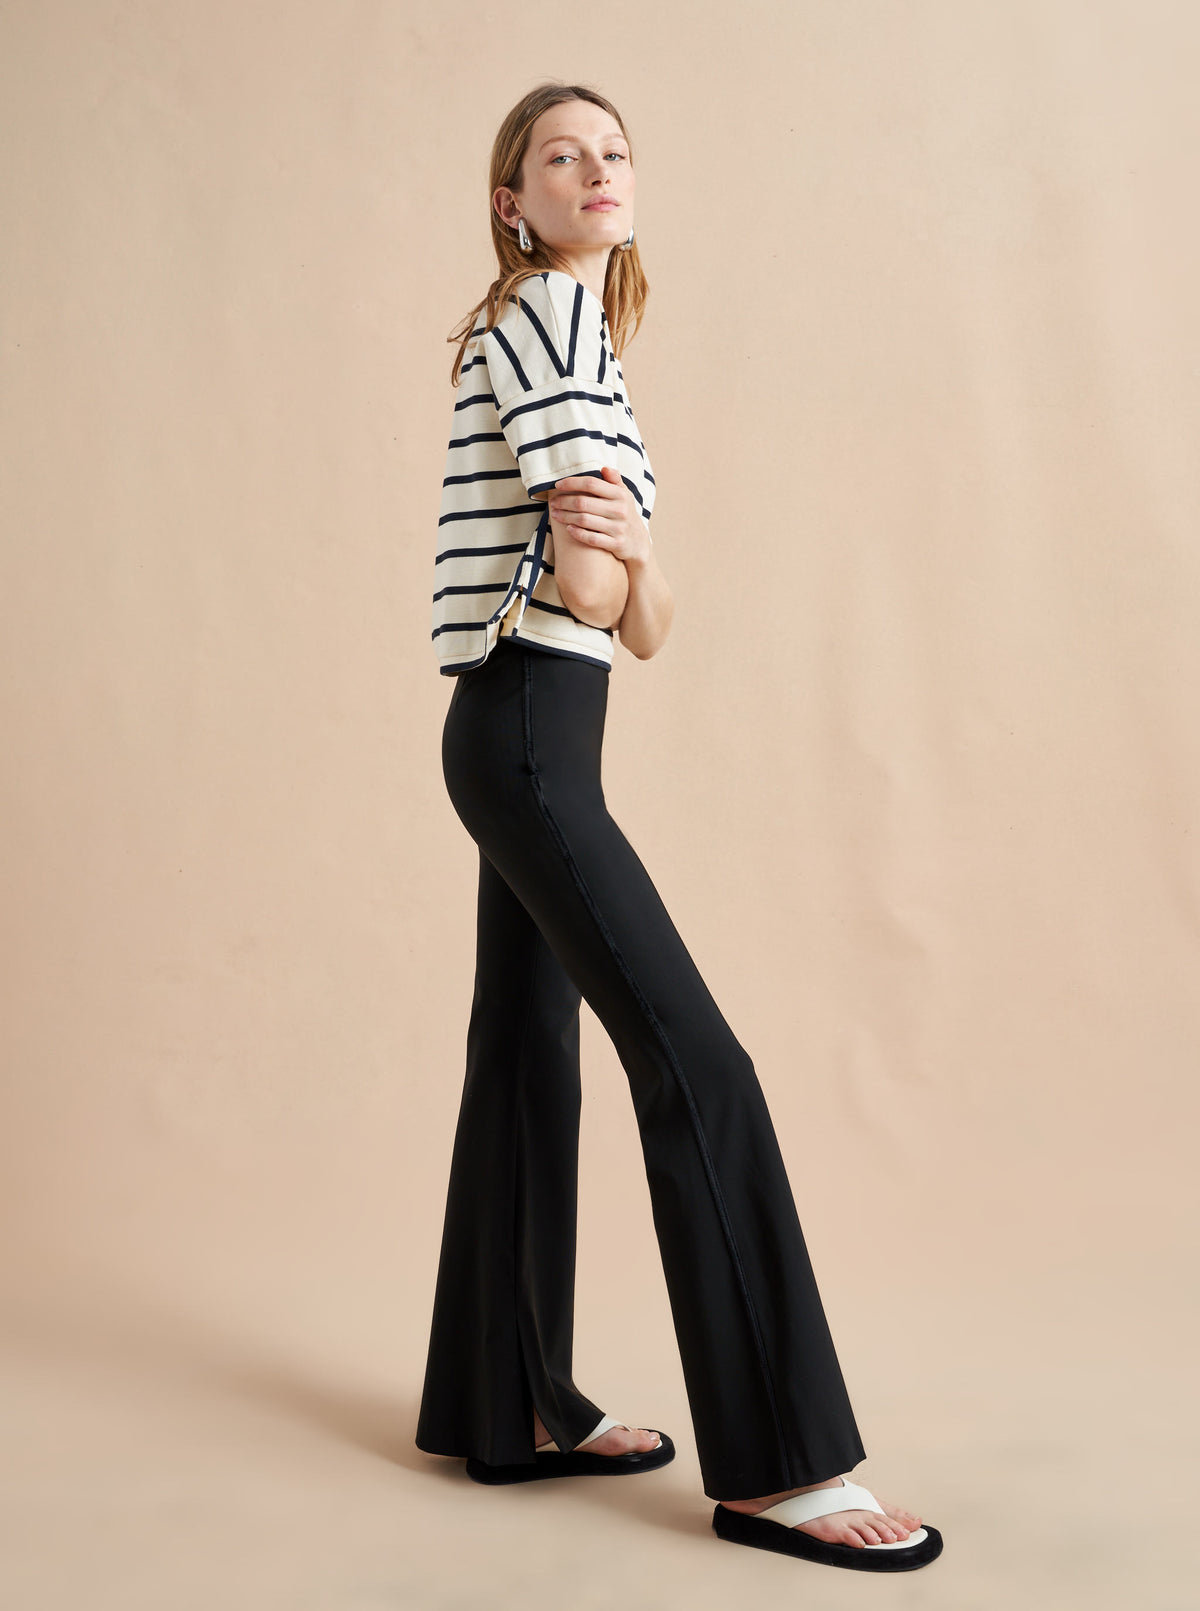 These pants were made for walking, strutting, catwalking, sashaying, strolling-just about any mood you want to bring to your day. Made from a hold-you-in blend of viscose/elastane, these pants give you the perfect line. Pair with oversize sweaters, camisoles and blazers or a simple tee but don't forget l'attitude.